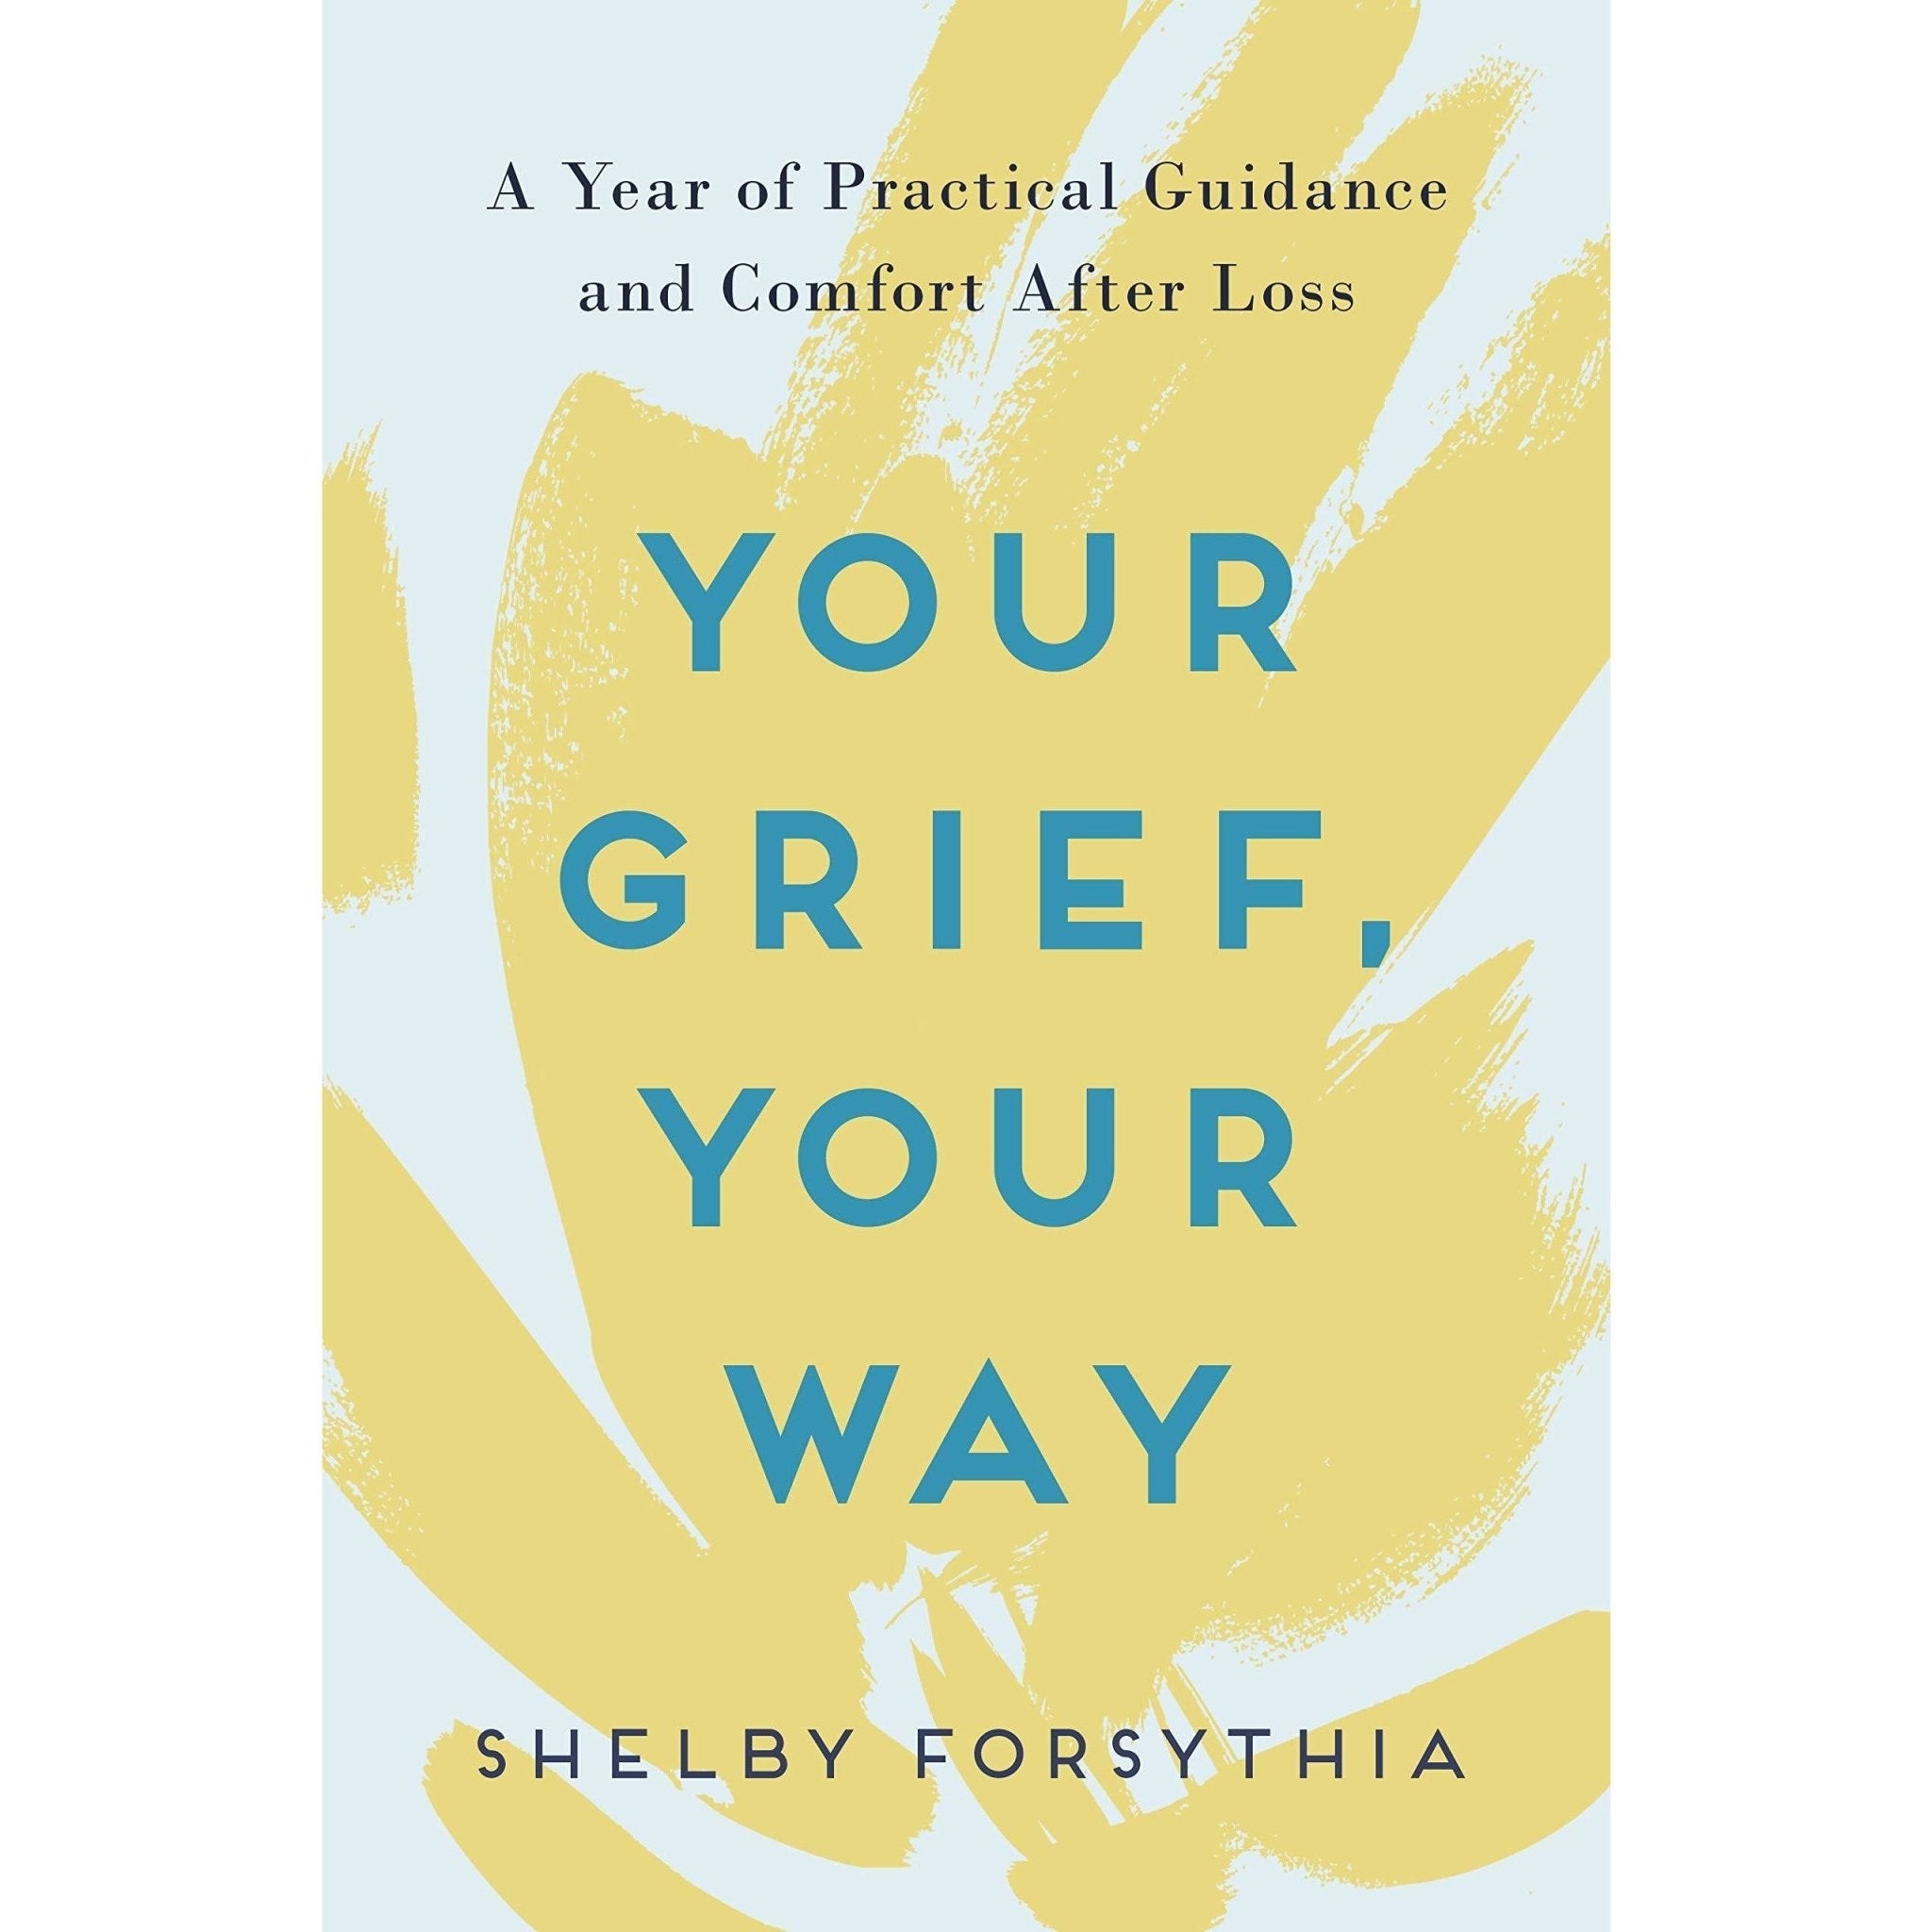 Your Grief, Your Way - Paperback Book